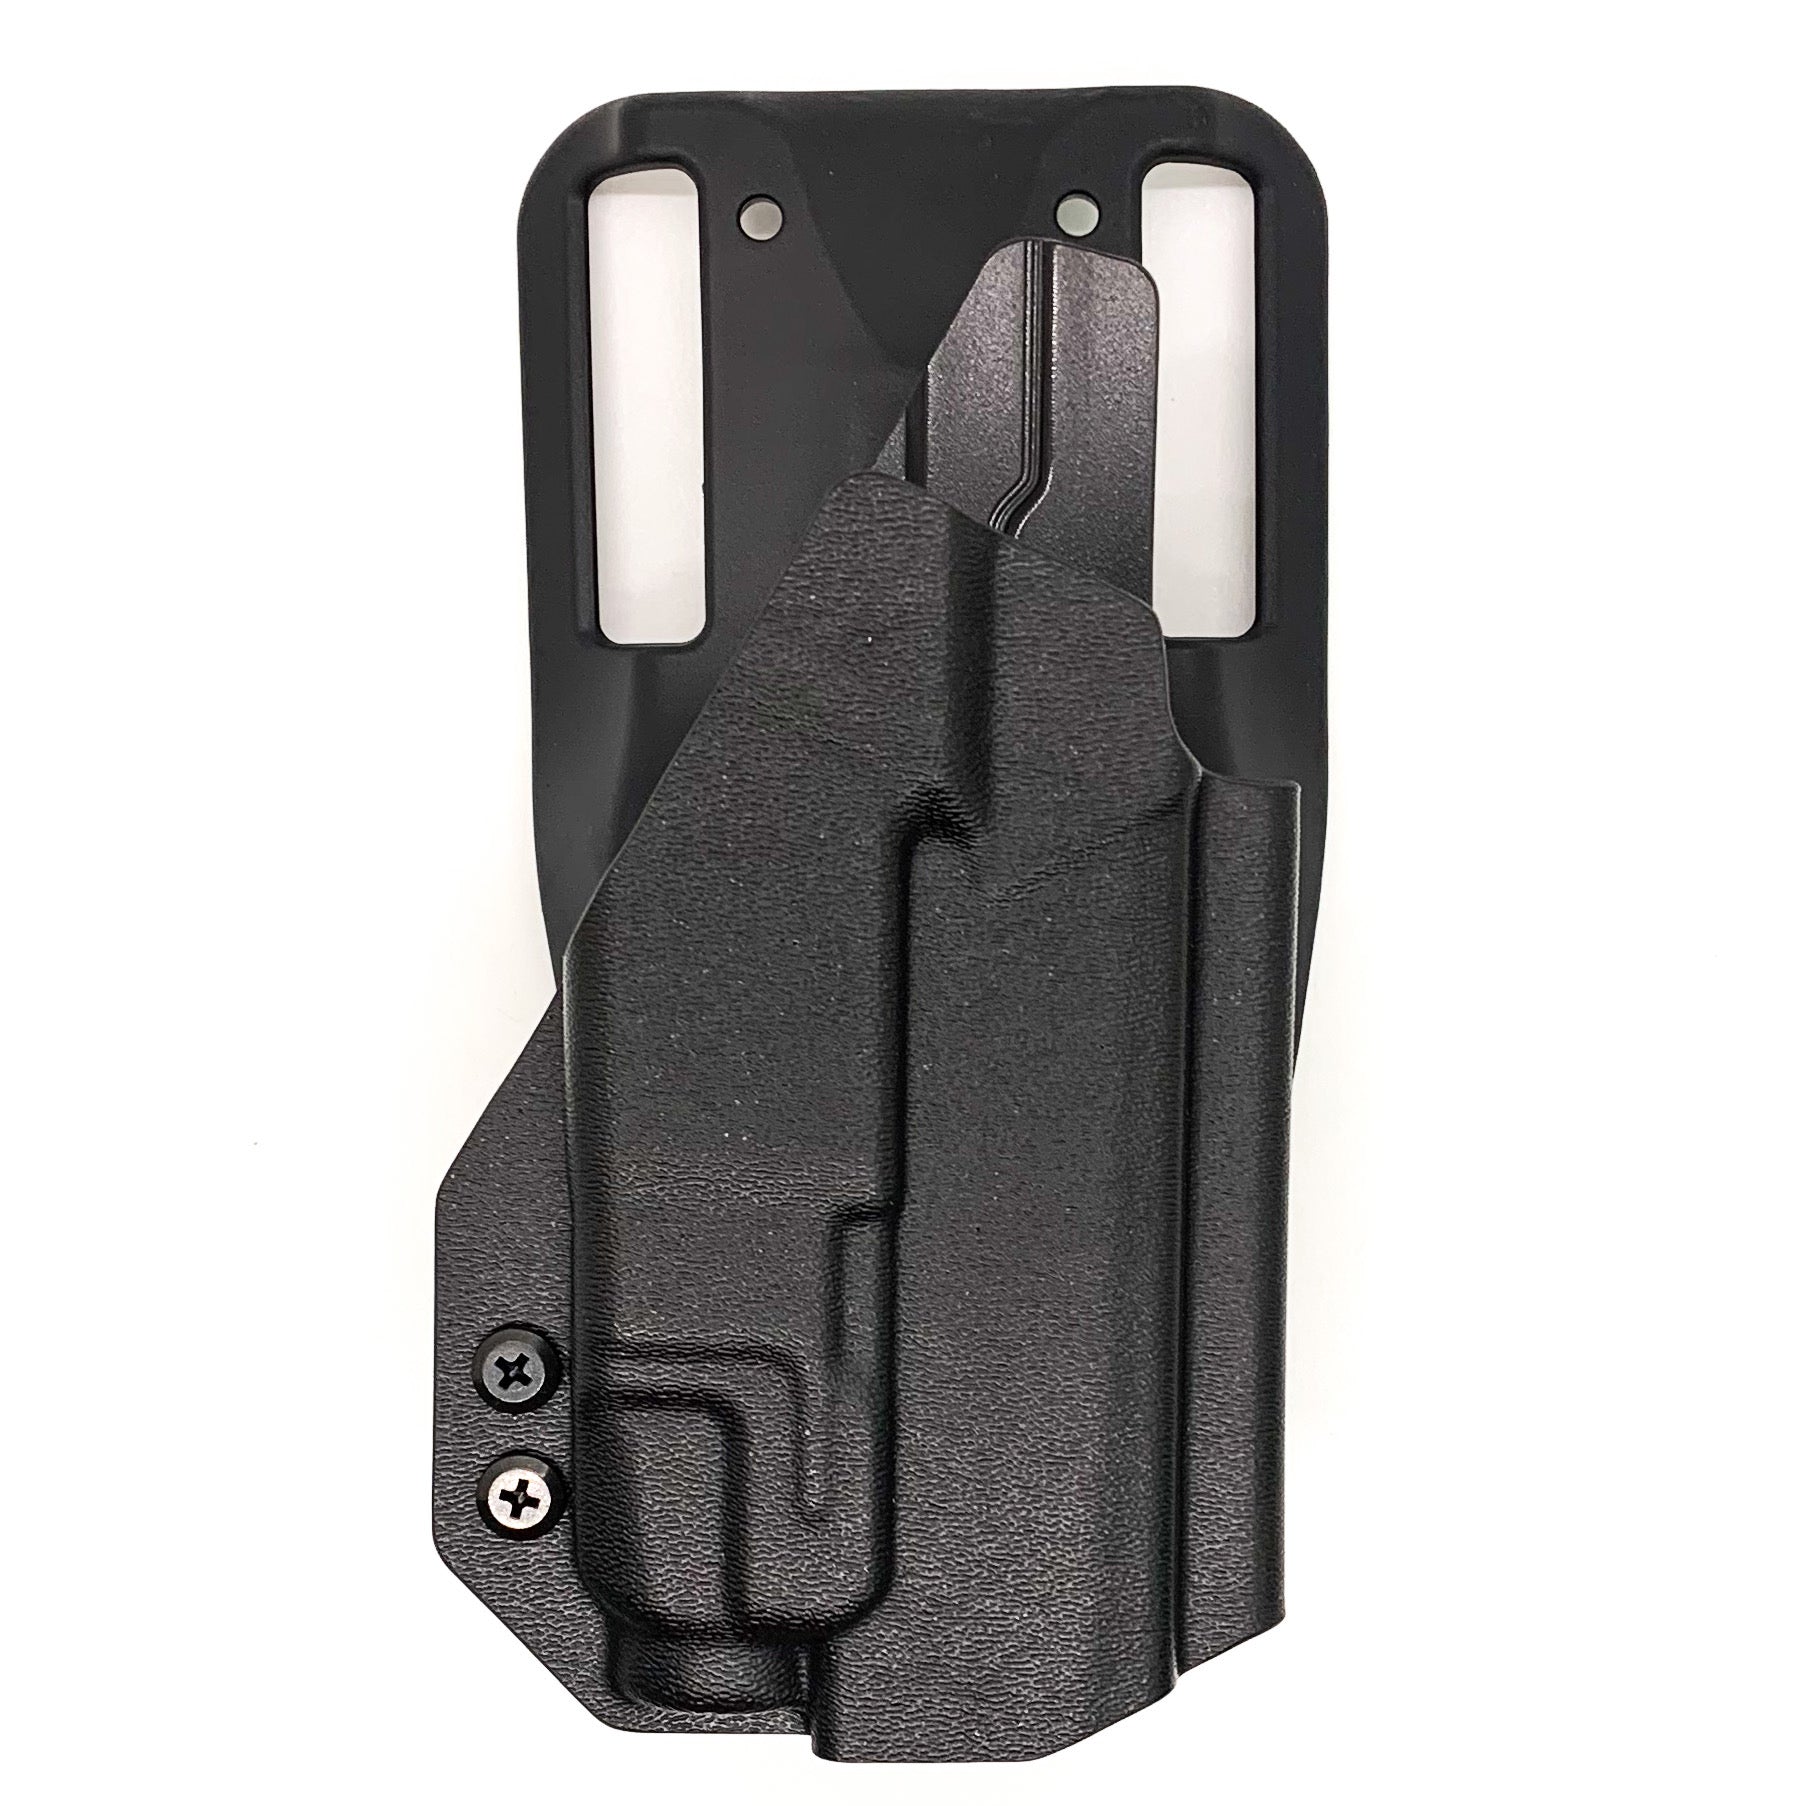 For the best OWB Duty & Competition Kydex Holster designed to fit the Sig Sauer P365-XMACRO, P365, and P365XL with the Mischief Machine Alpha, Omega, & Commander Grip Module and the Streamlight TLR-7A, shop Four Brothers Holsters. Full sweat guard, Open muzzle, cut for red dot sights. MACRO TLR7 TLR7A